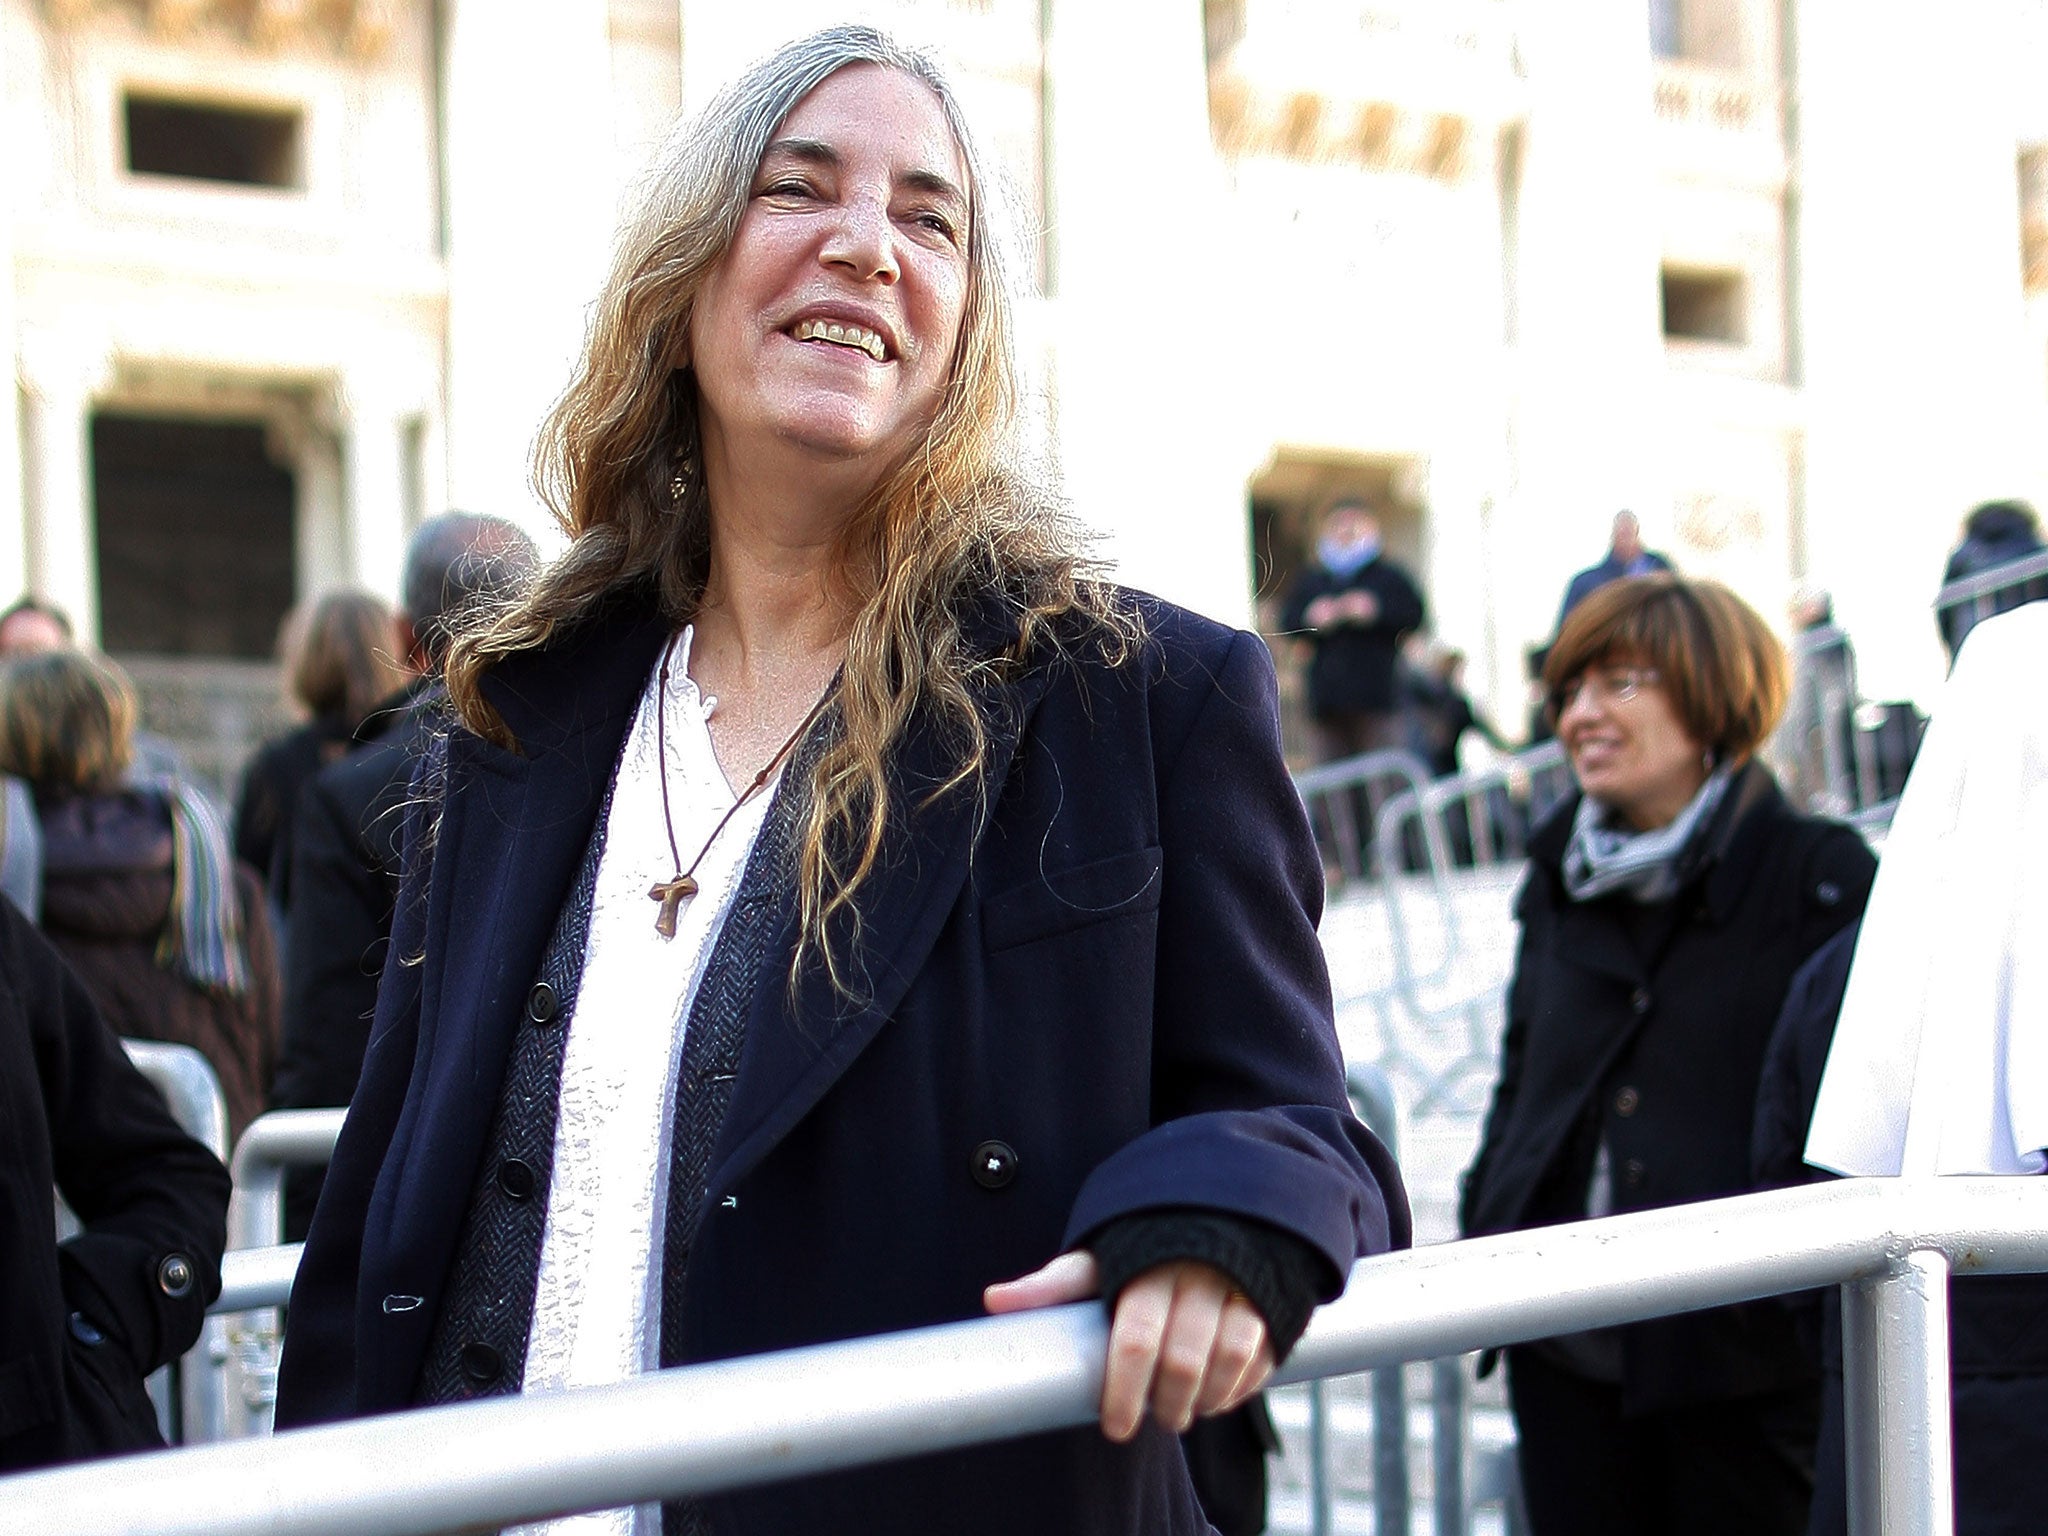 Singer Patti Smith attends Pope Francis' weekly Vatican audience in St. Peter's Square